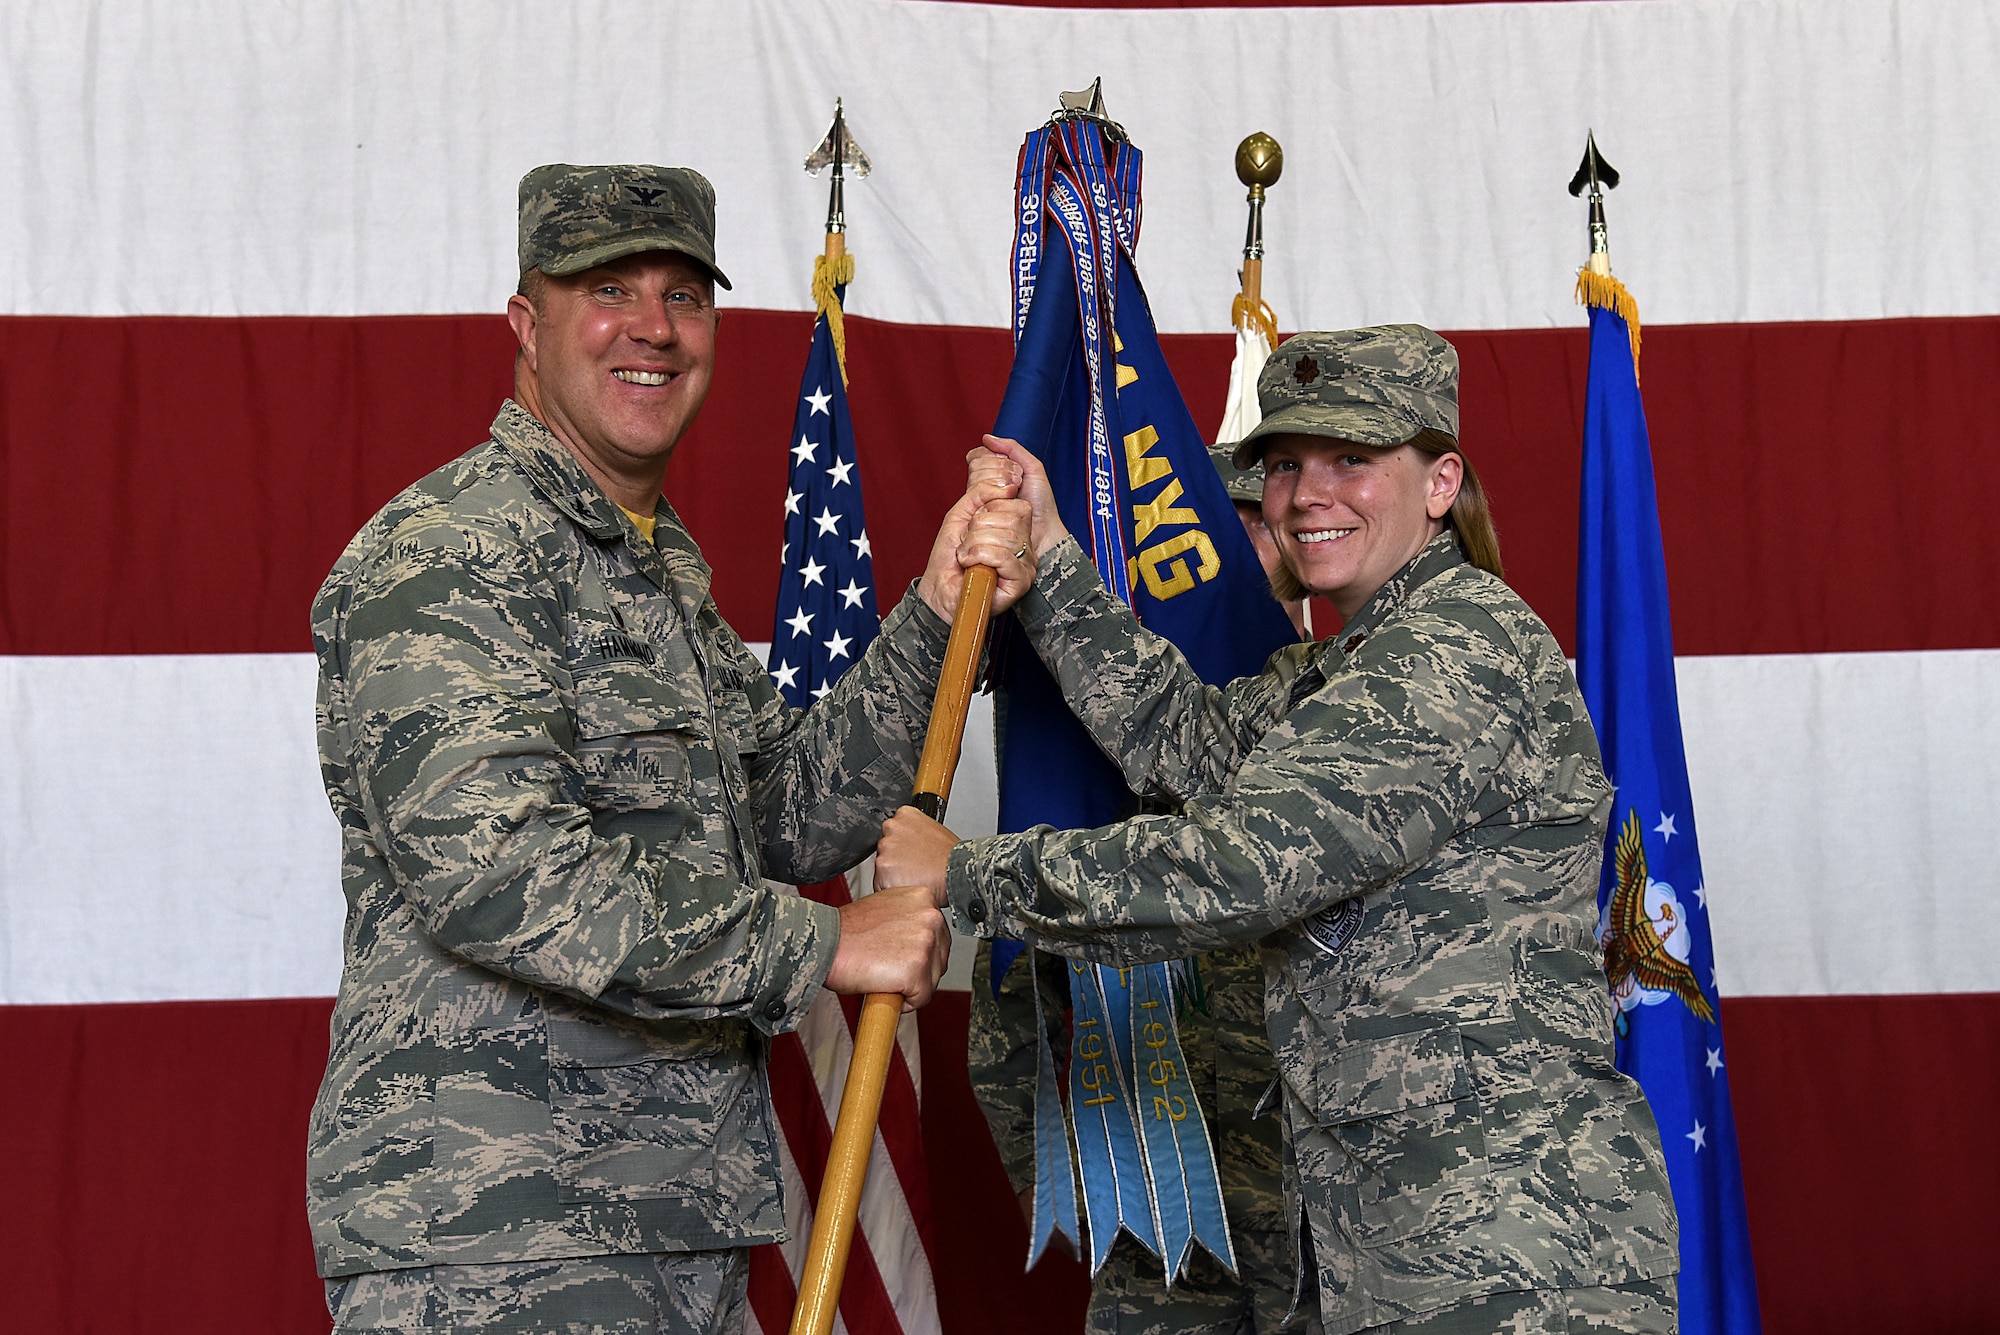 U.S. Air Force Maj. Kristen Torma receives the 51st Maintenance Squadron (MXS) guidon from Col. Michael Hammond, 51st Maintenance Group commander, during a change of command ceremony at Osan Air Base, Republic of Korea, June 21, 2018. Prior to taking leadership of 51st MXS, Torma served as commander of the 20th Aircraft Maintenance Squadron at Shaw Air Force Base, South Carolina. (U.S. Air Force photo by Senior Airman Kelsey Tucker)